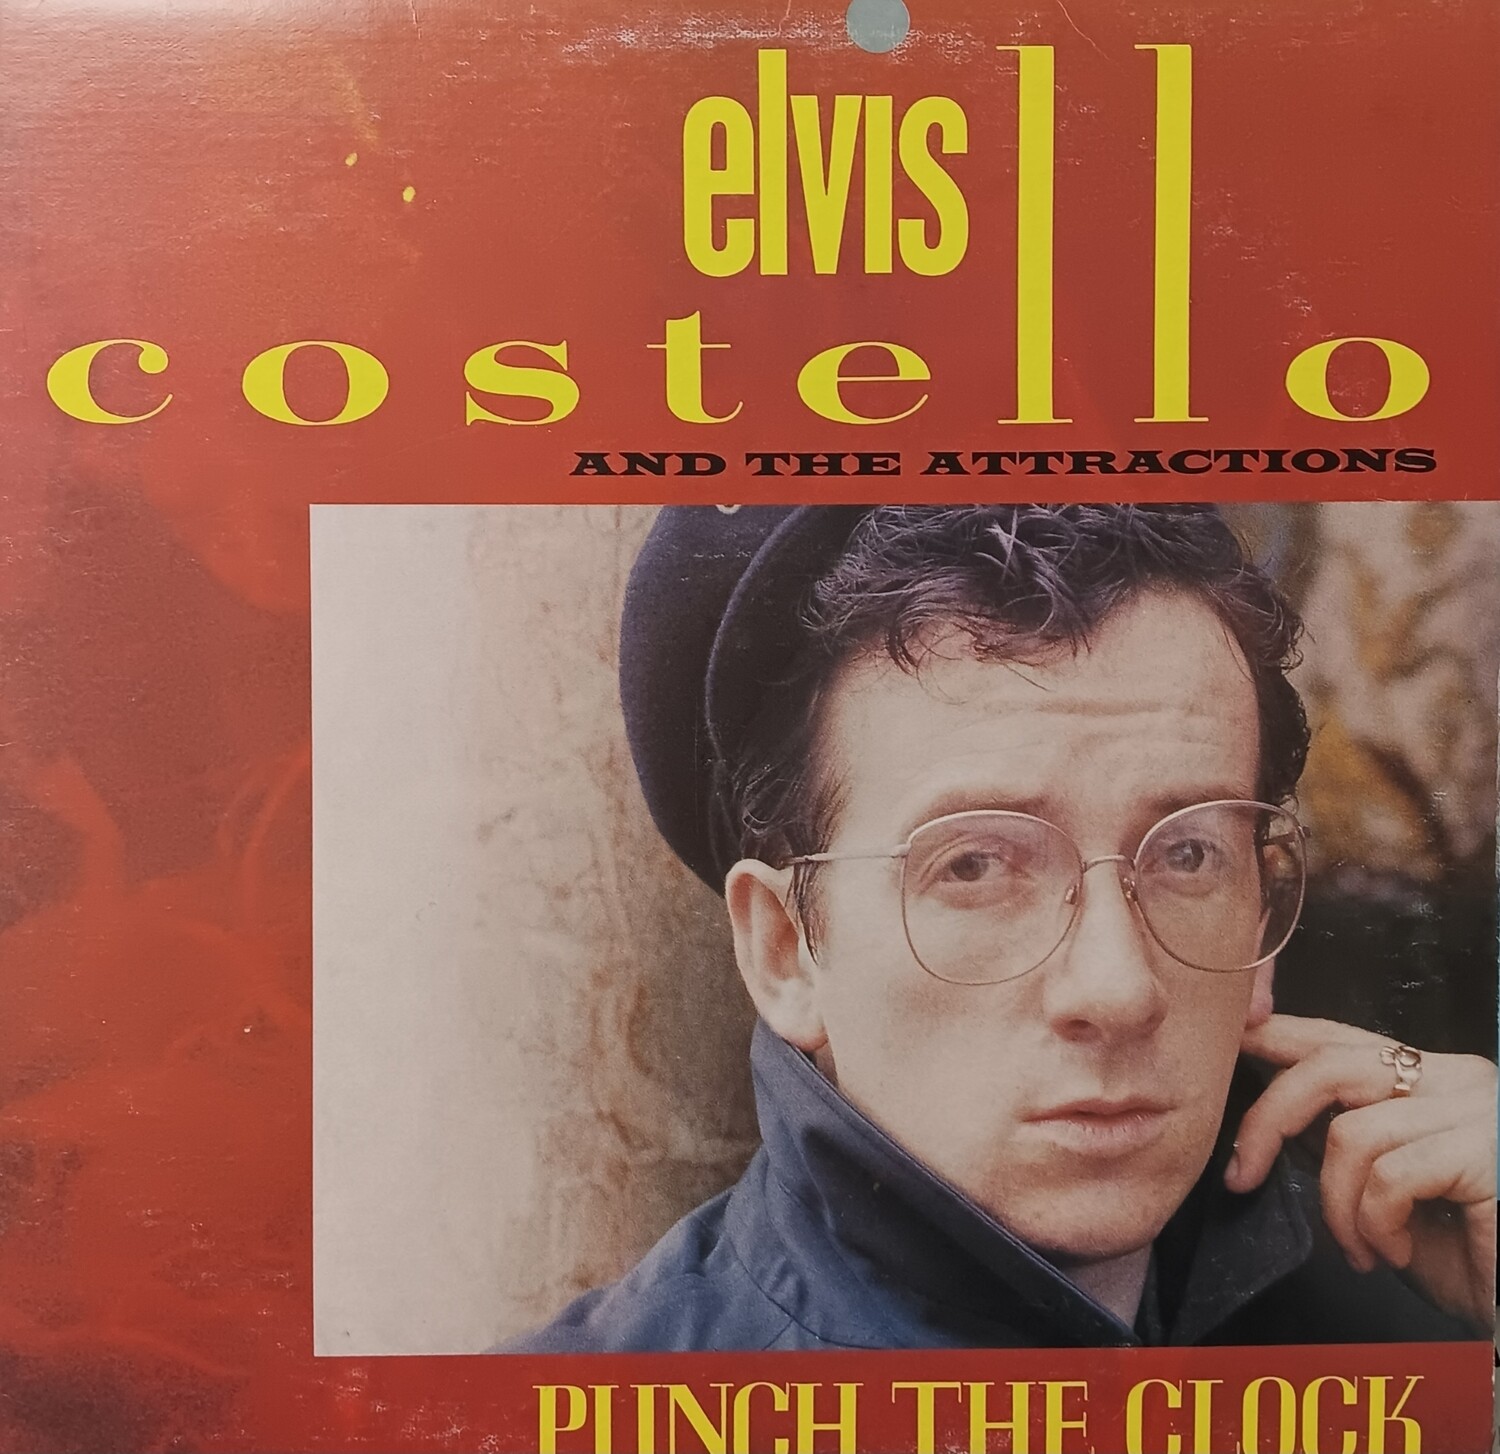 Elvis Costello and The Attractions - Punch the clock